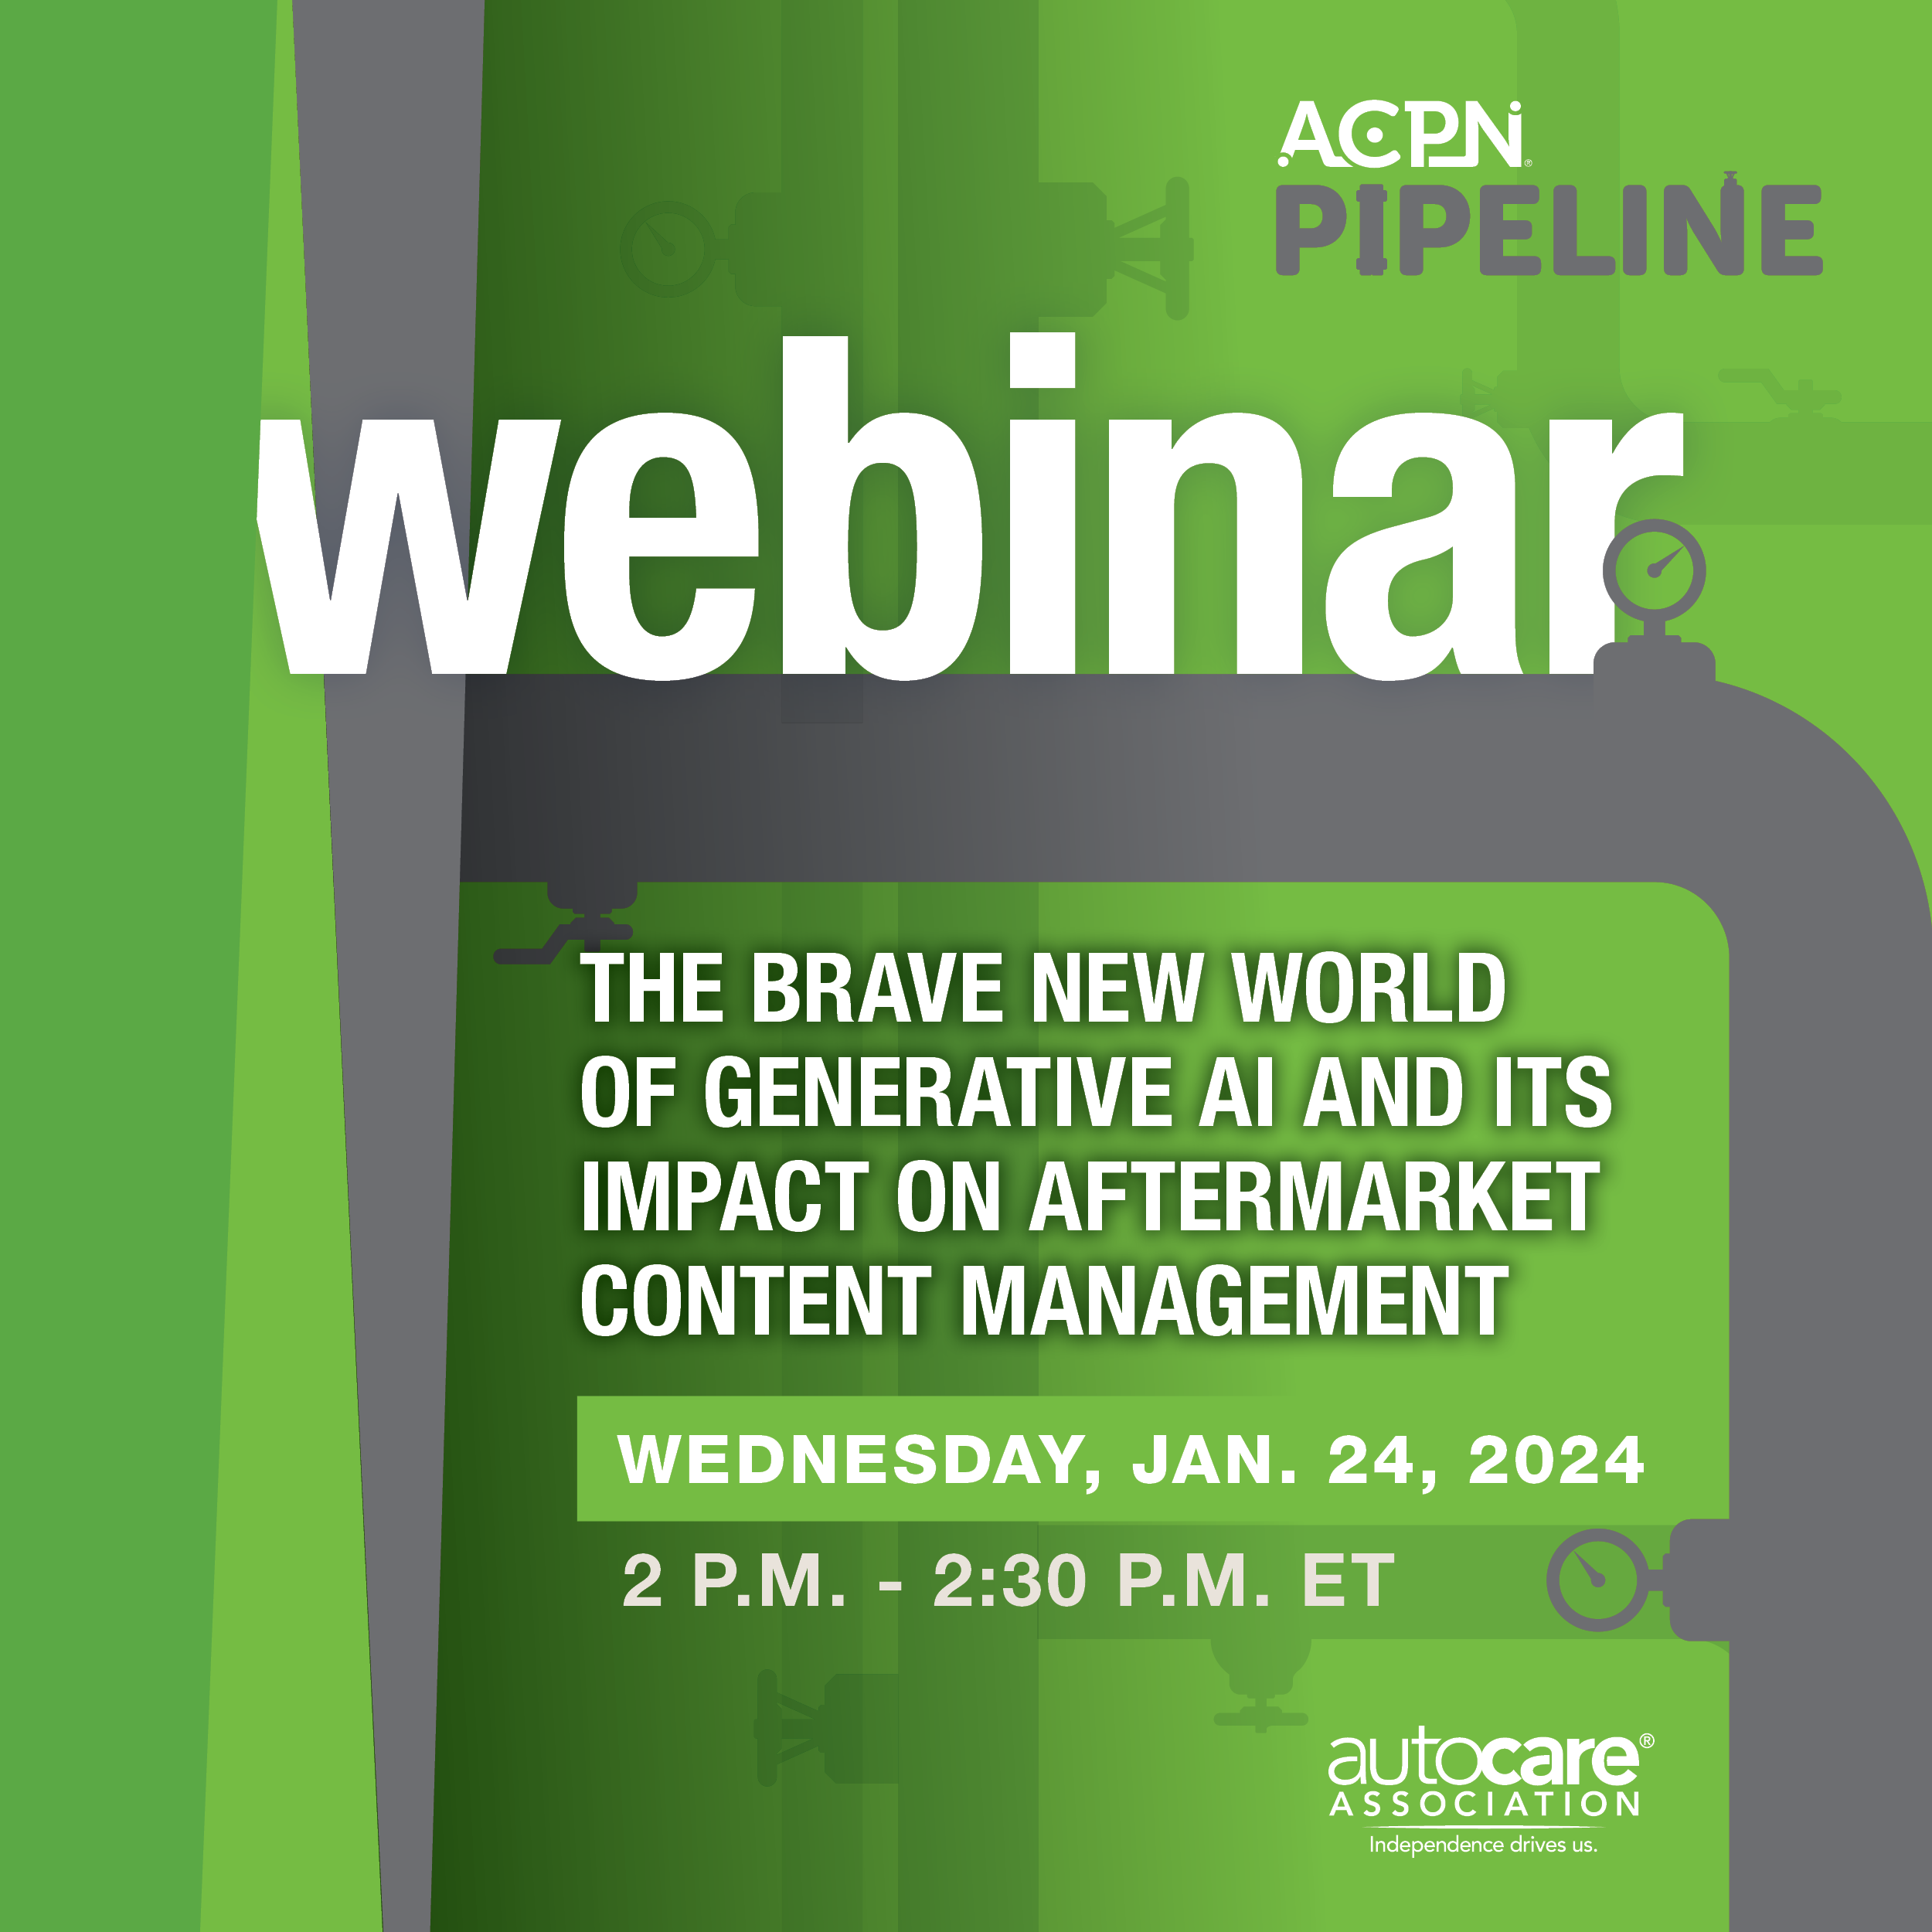 Image depicting the title of the January ACPN Pipeline Webinar